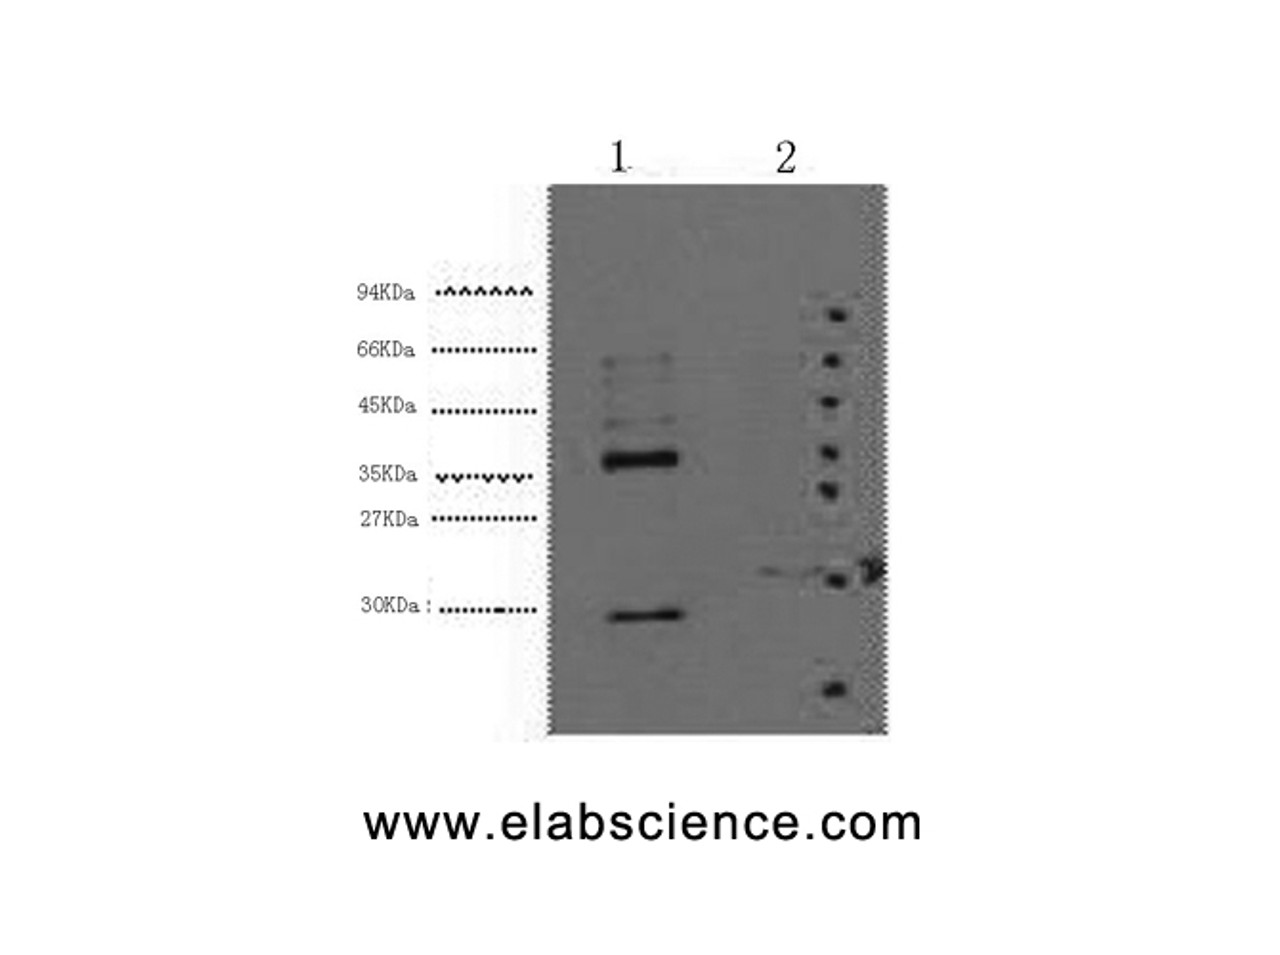 Western Blot analysis of 1) Hela, 2) 293T cells using CA9 Monoclonal Antibody at dilution of 1:5000.